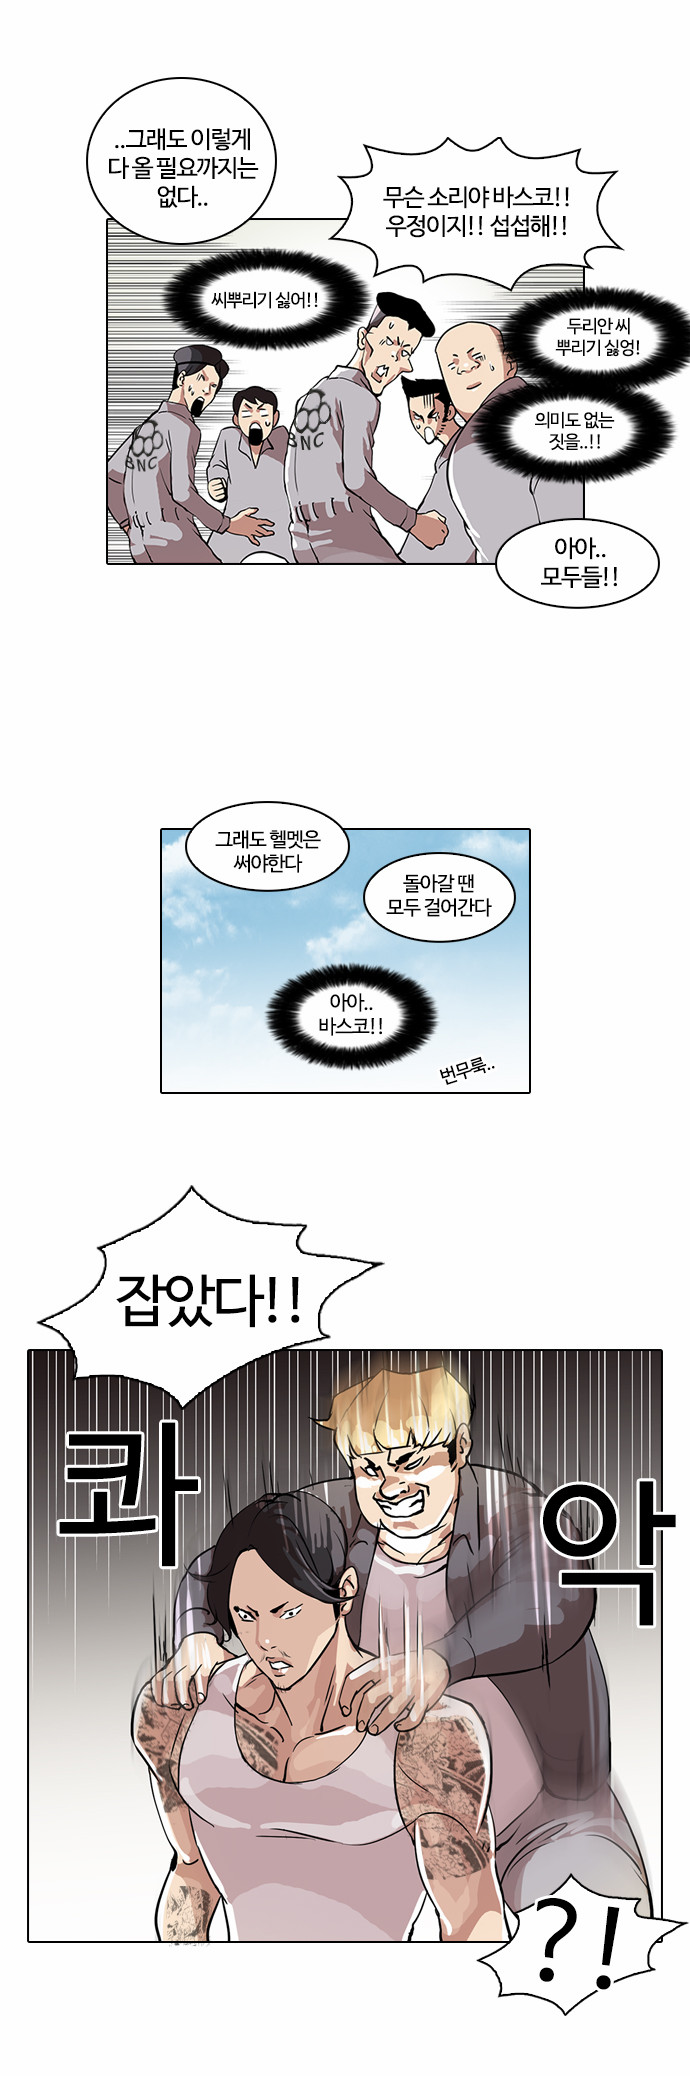 Lookism - Chapter 38 - Page 3